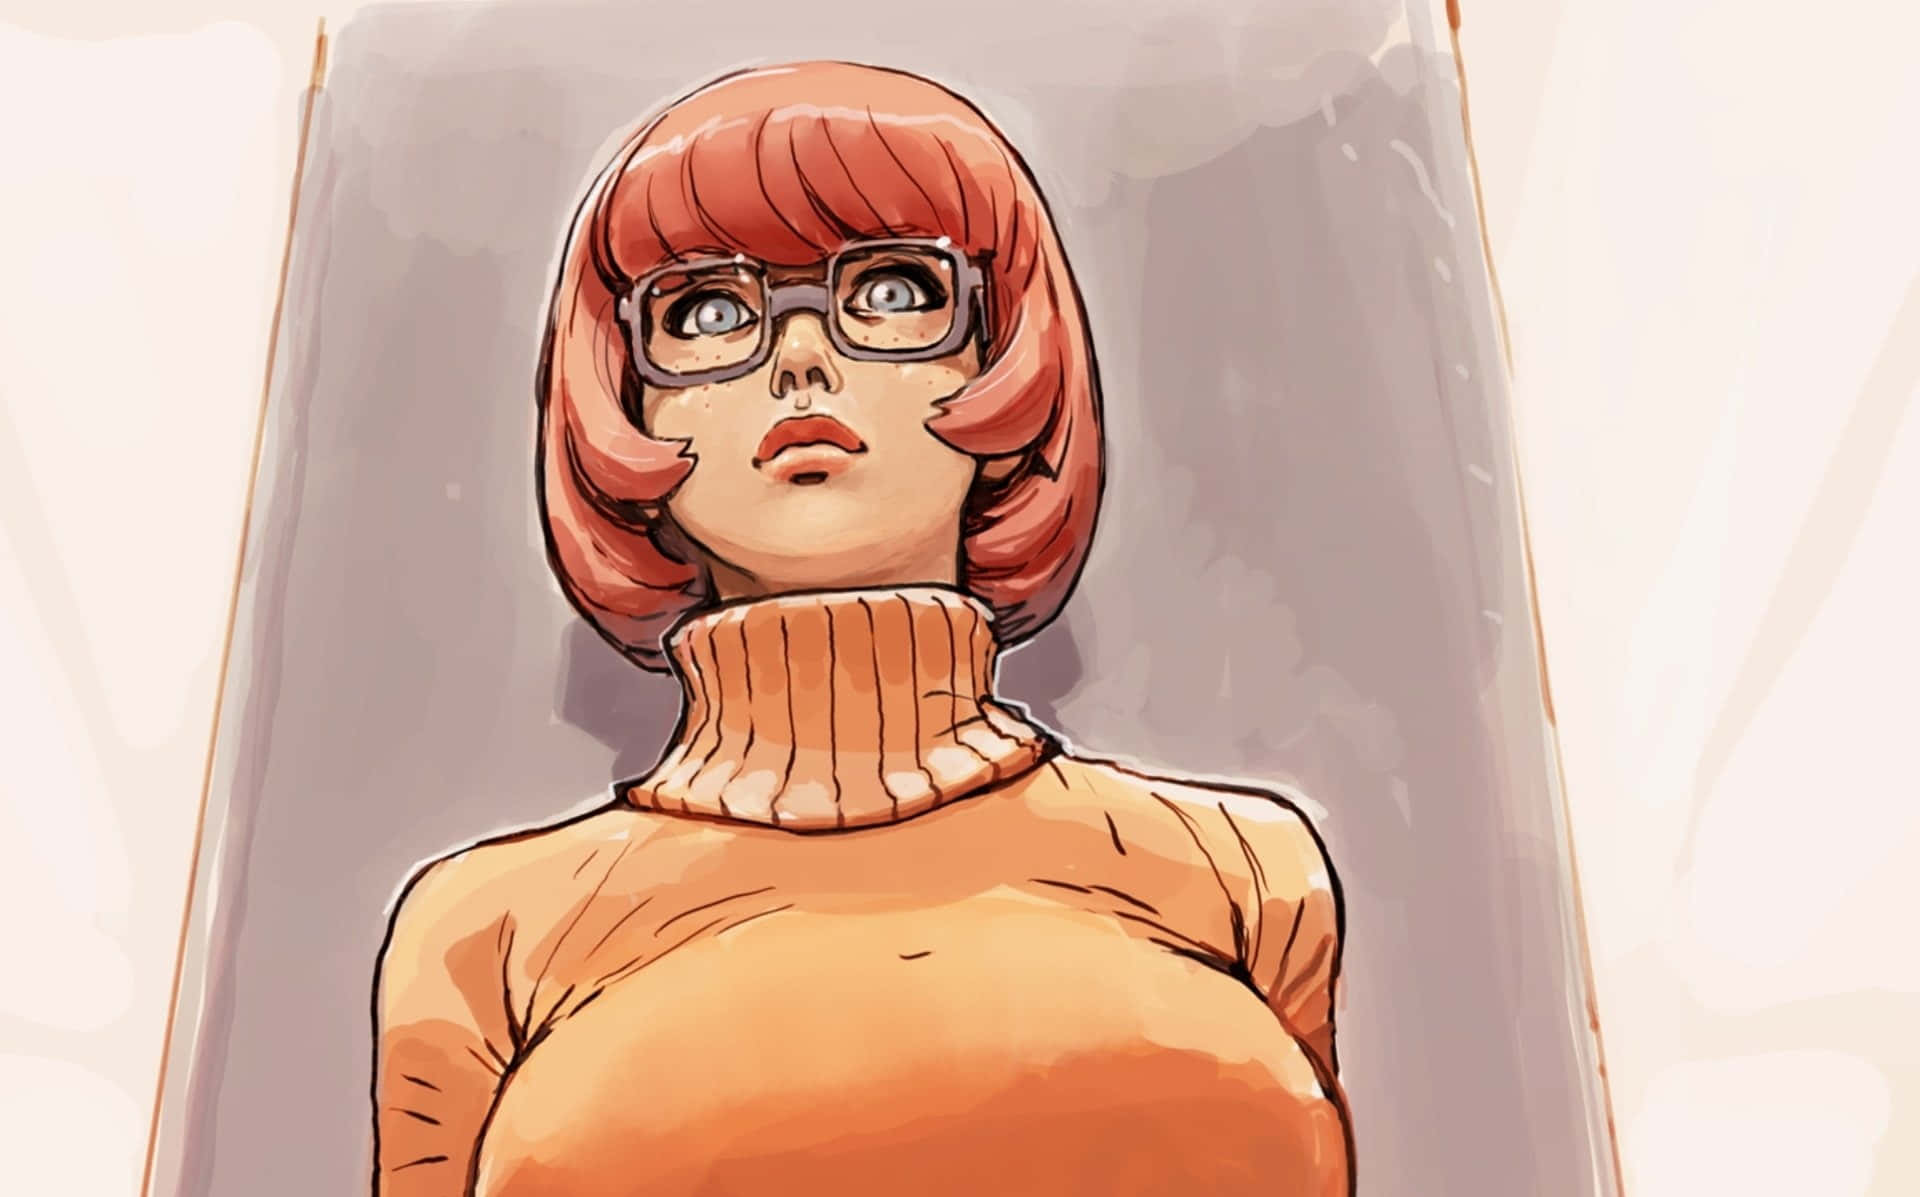 A Cartoon Of A Woman With Glasses And Orange Hair